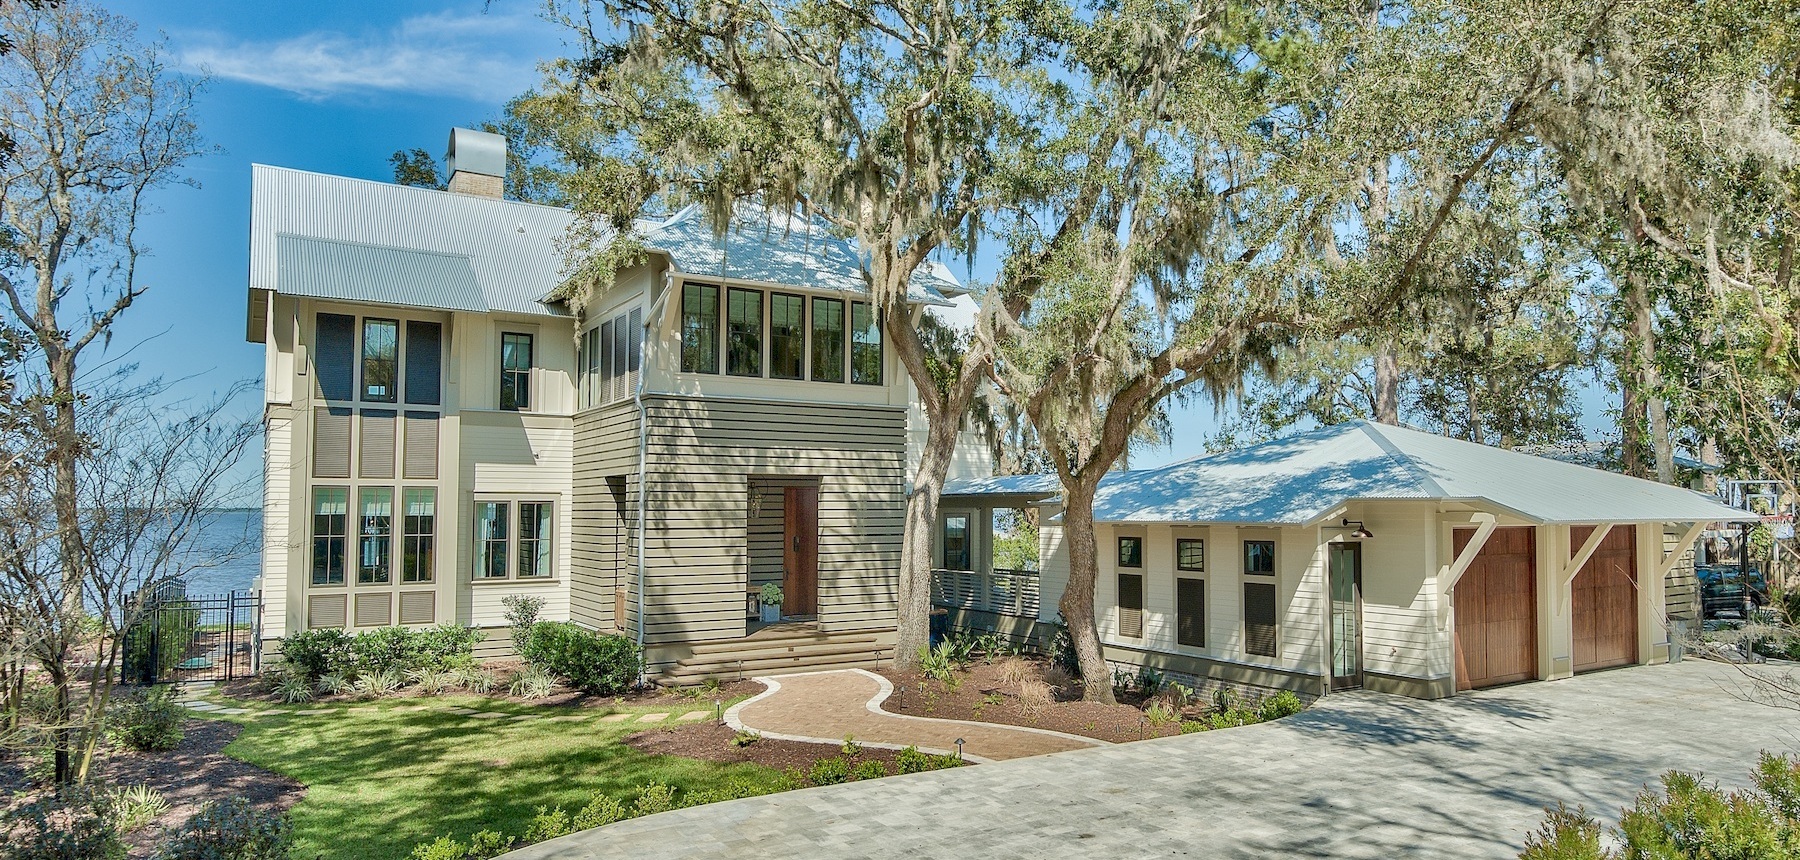 One of Point Washington's beautiful bayfront homes with towering oak tree overhead